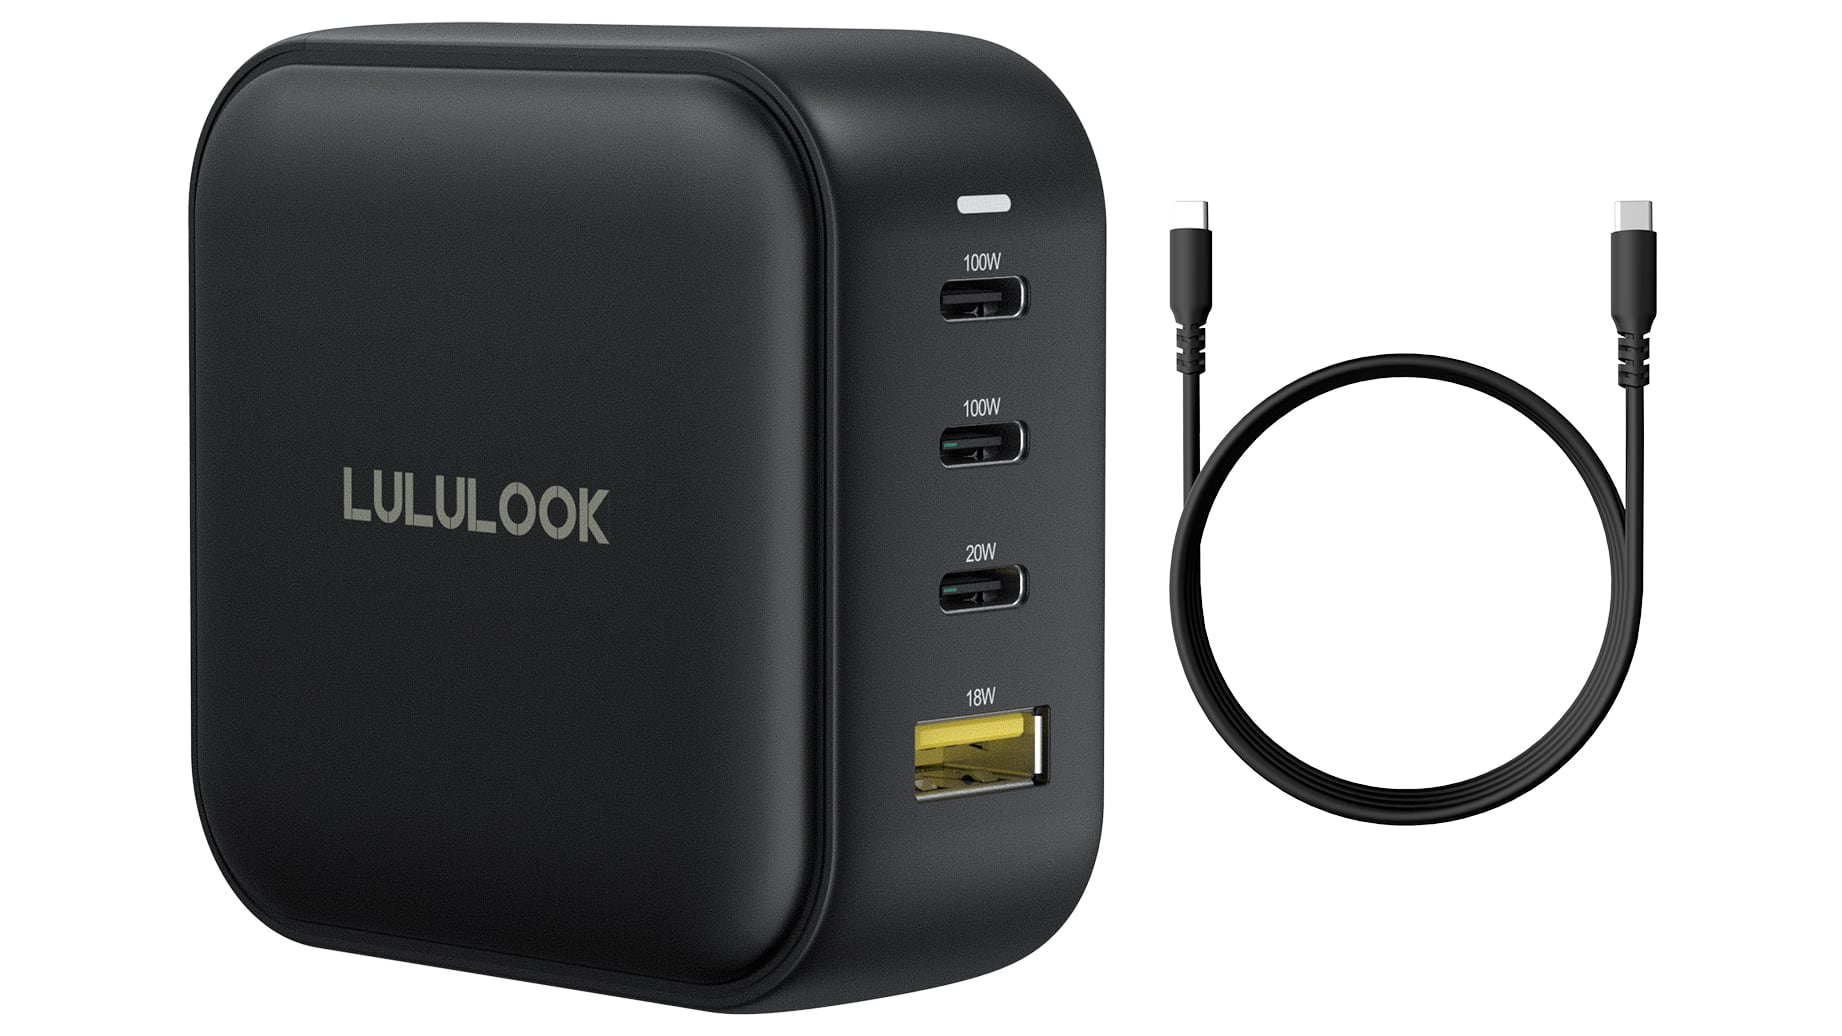 MacRumors Giveaway: Win an iPhone 14 Plus and 100W Multiport USB-C Charger From Lululook